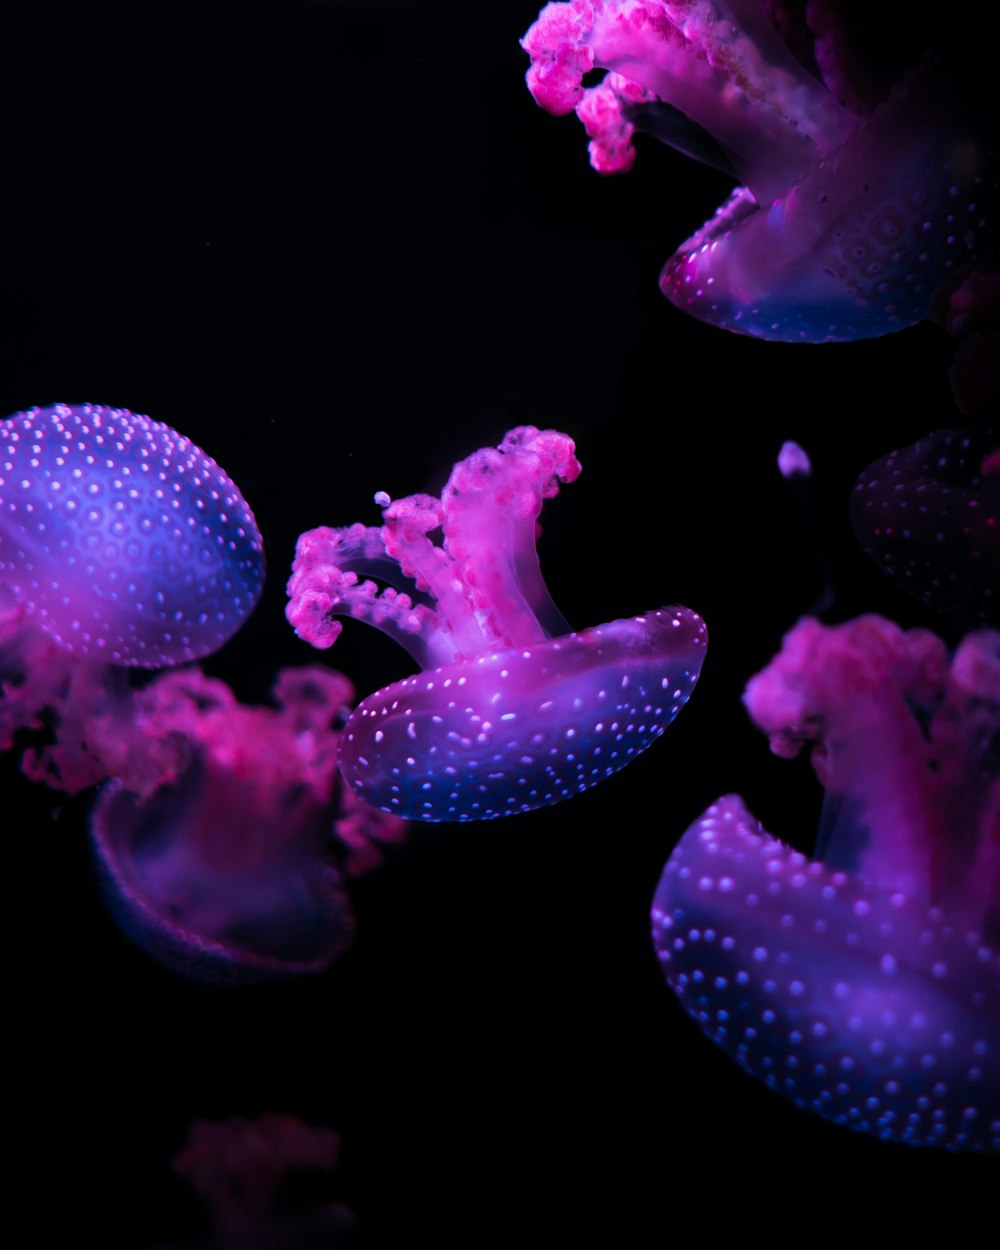 pink jellyfishes floating underwater